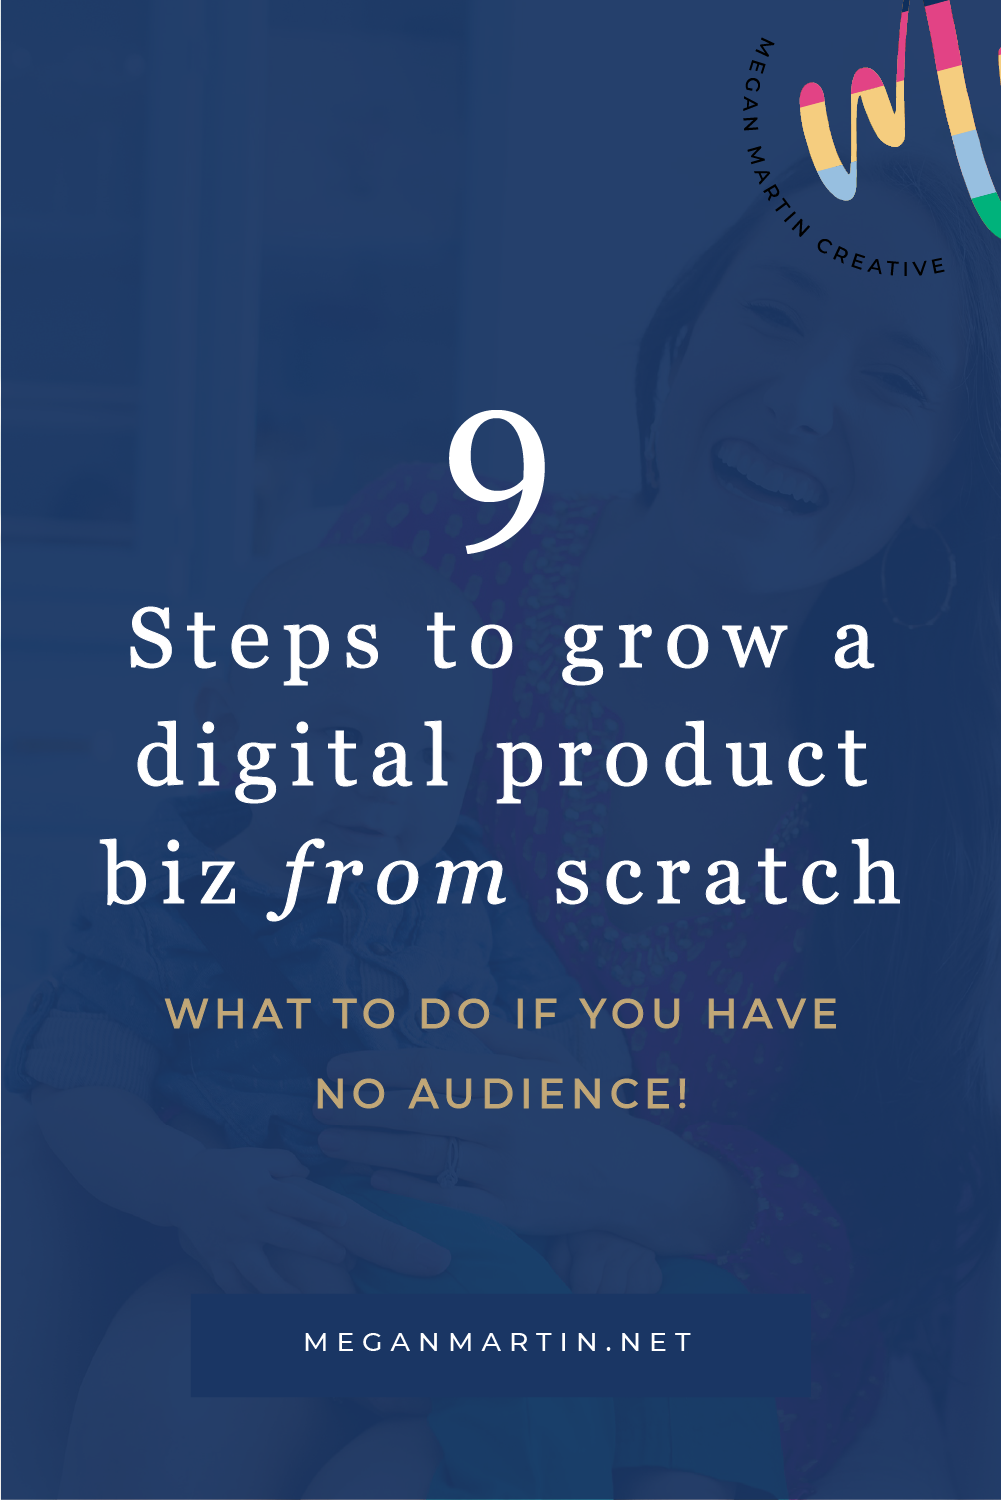 How to Grow your Digital Product Business from Scratch in 9 steps 